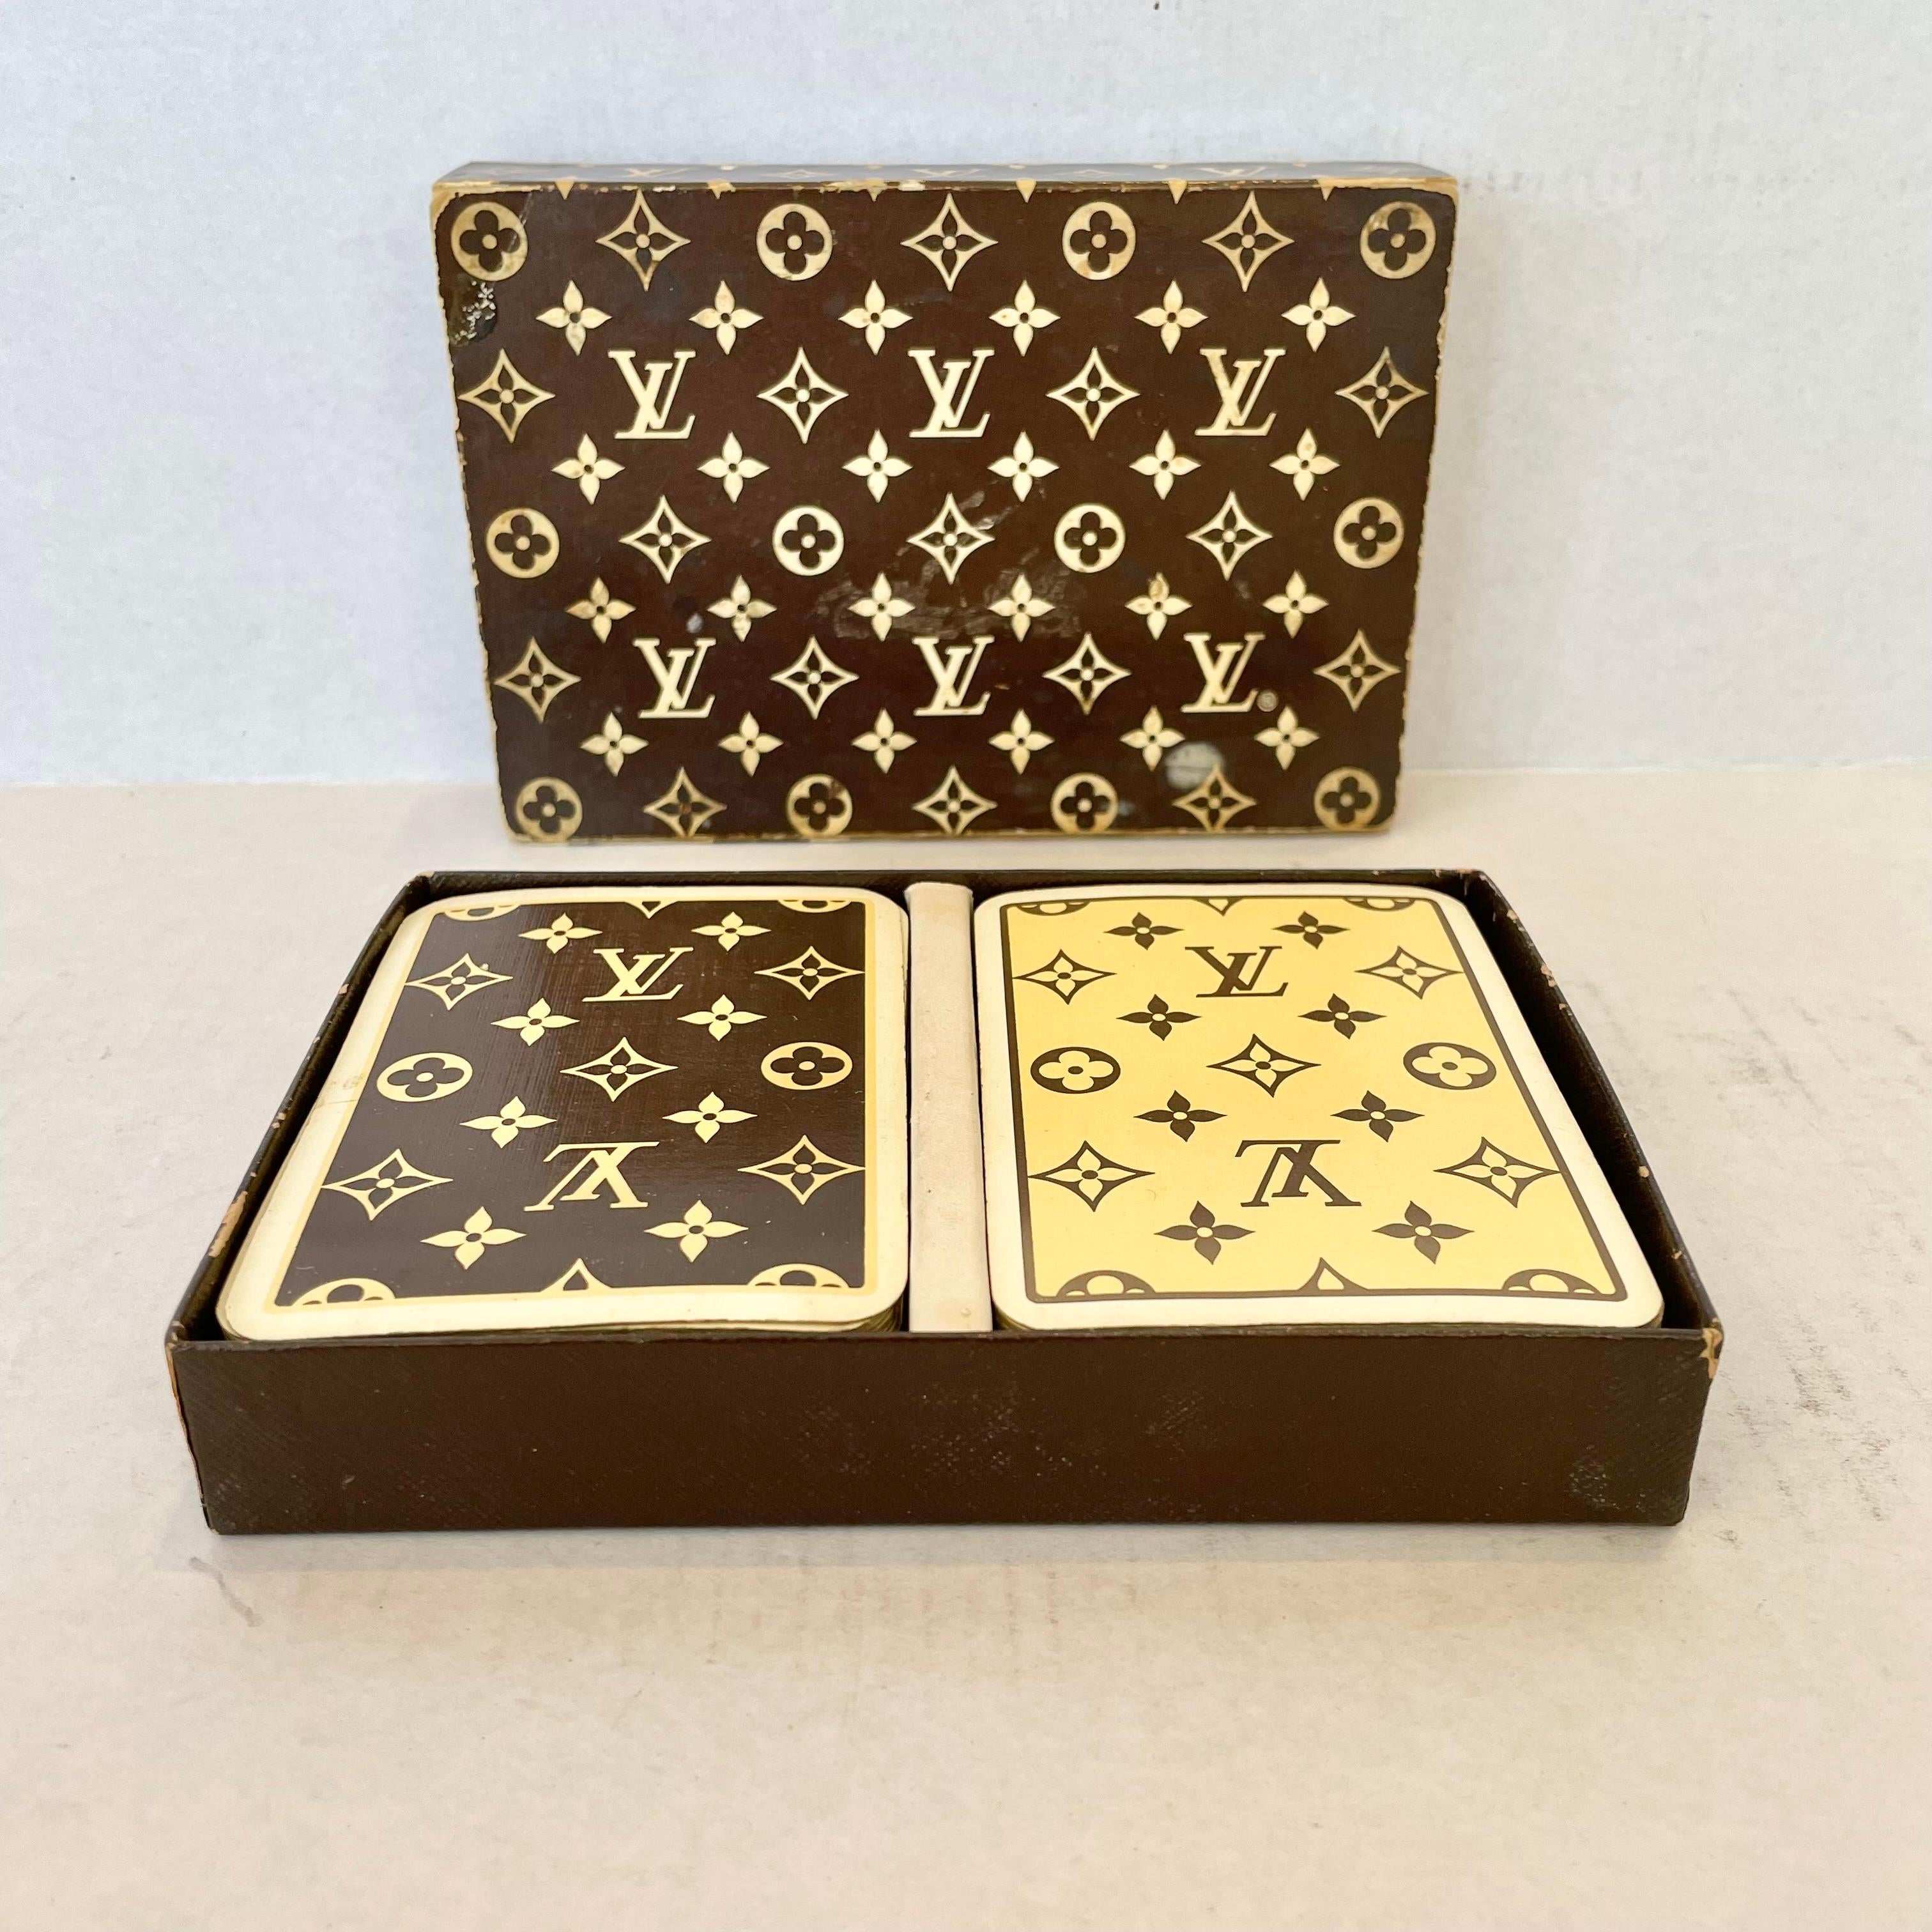 Vintage Louis Vuitton playing cards in the original box. Made in France, circa 1970s. There is a brown deck and a tan deck each with the iconic LV monogram design on the backs of the cards. Box is also printed with the LV monogram design. These